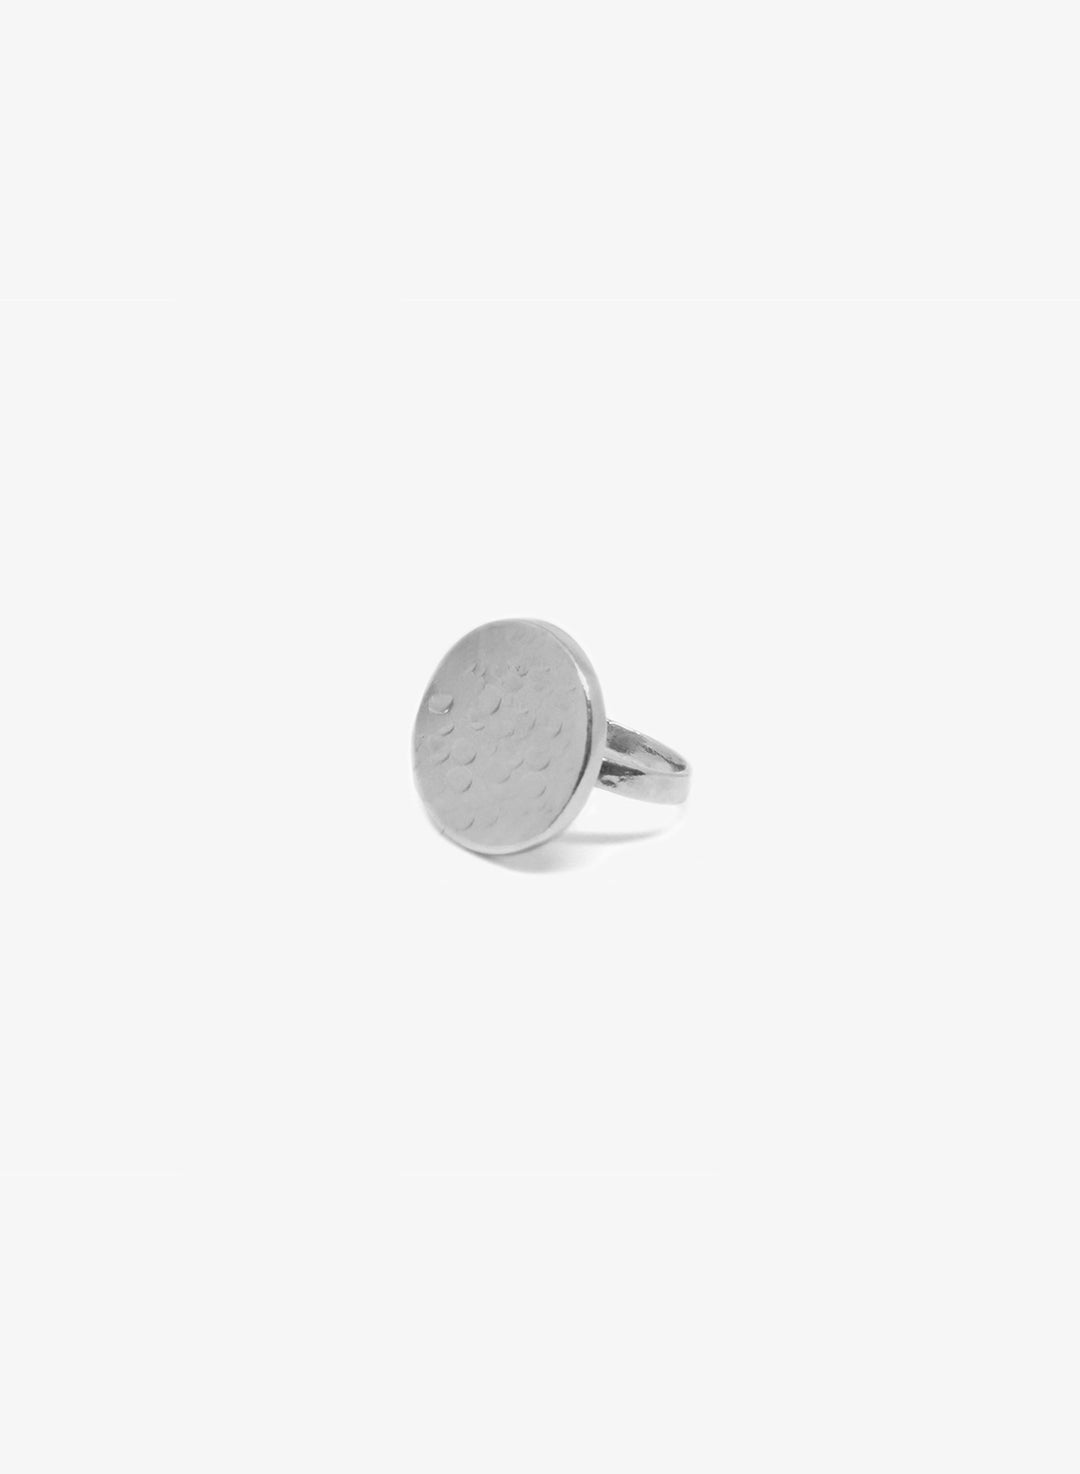 llayers-men-women-rond-silver-moon-hammered-ring-jewelry-mercury-handcrafted-in-Brooklyn-New-York-3